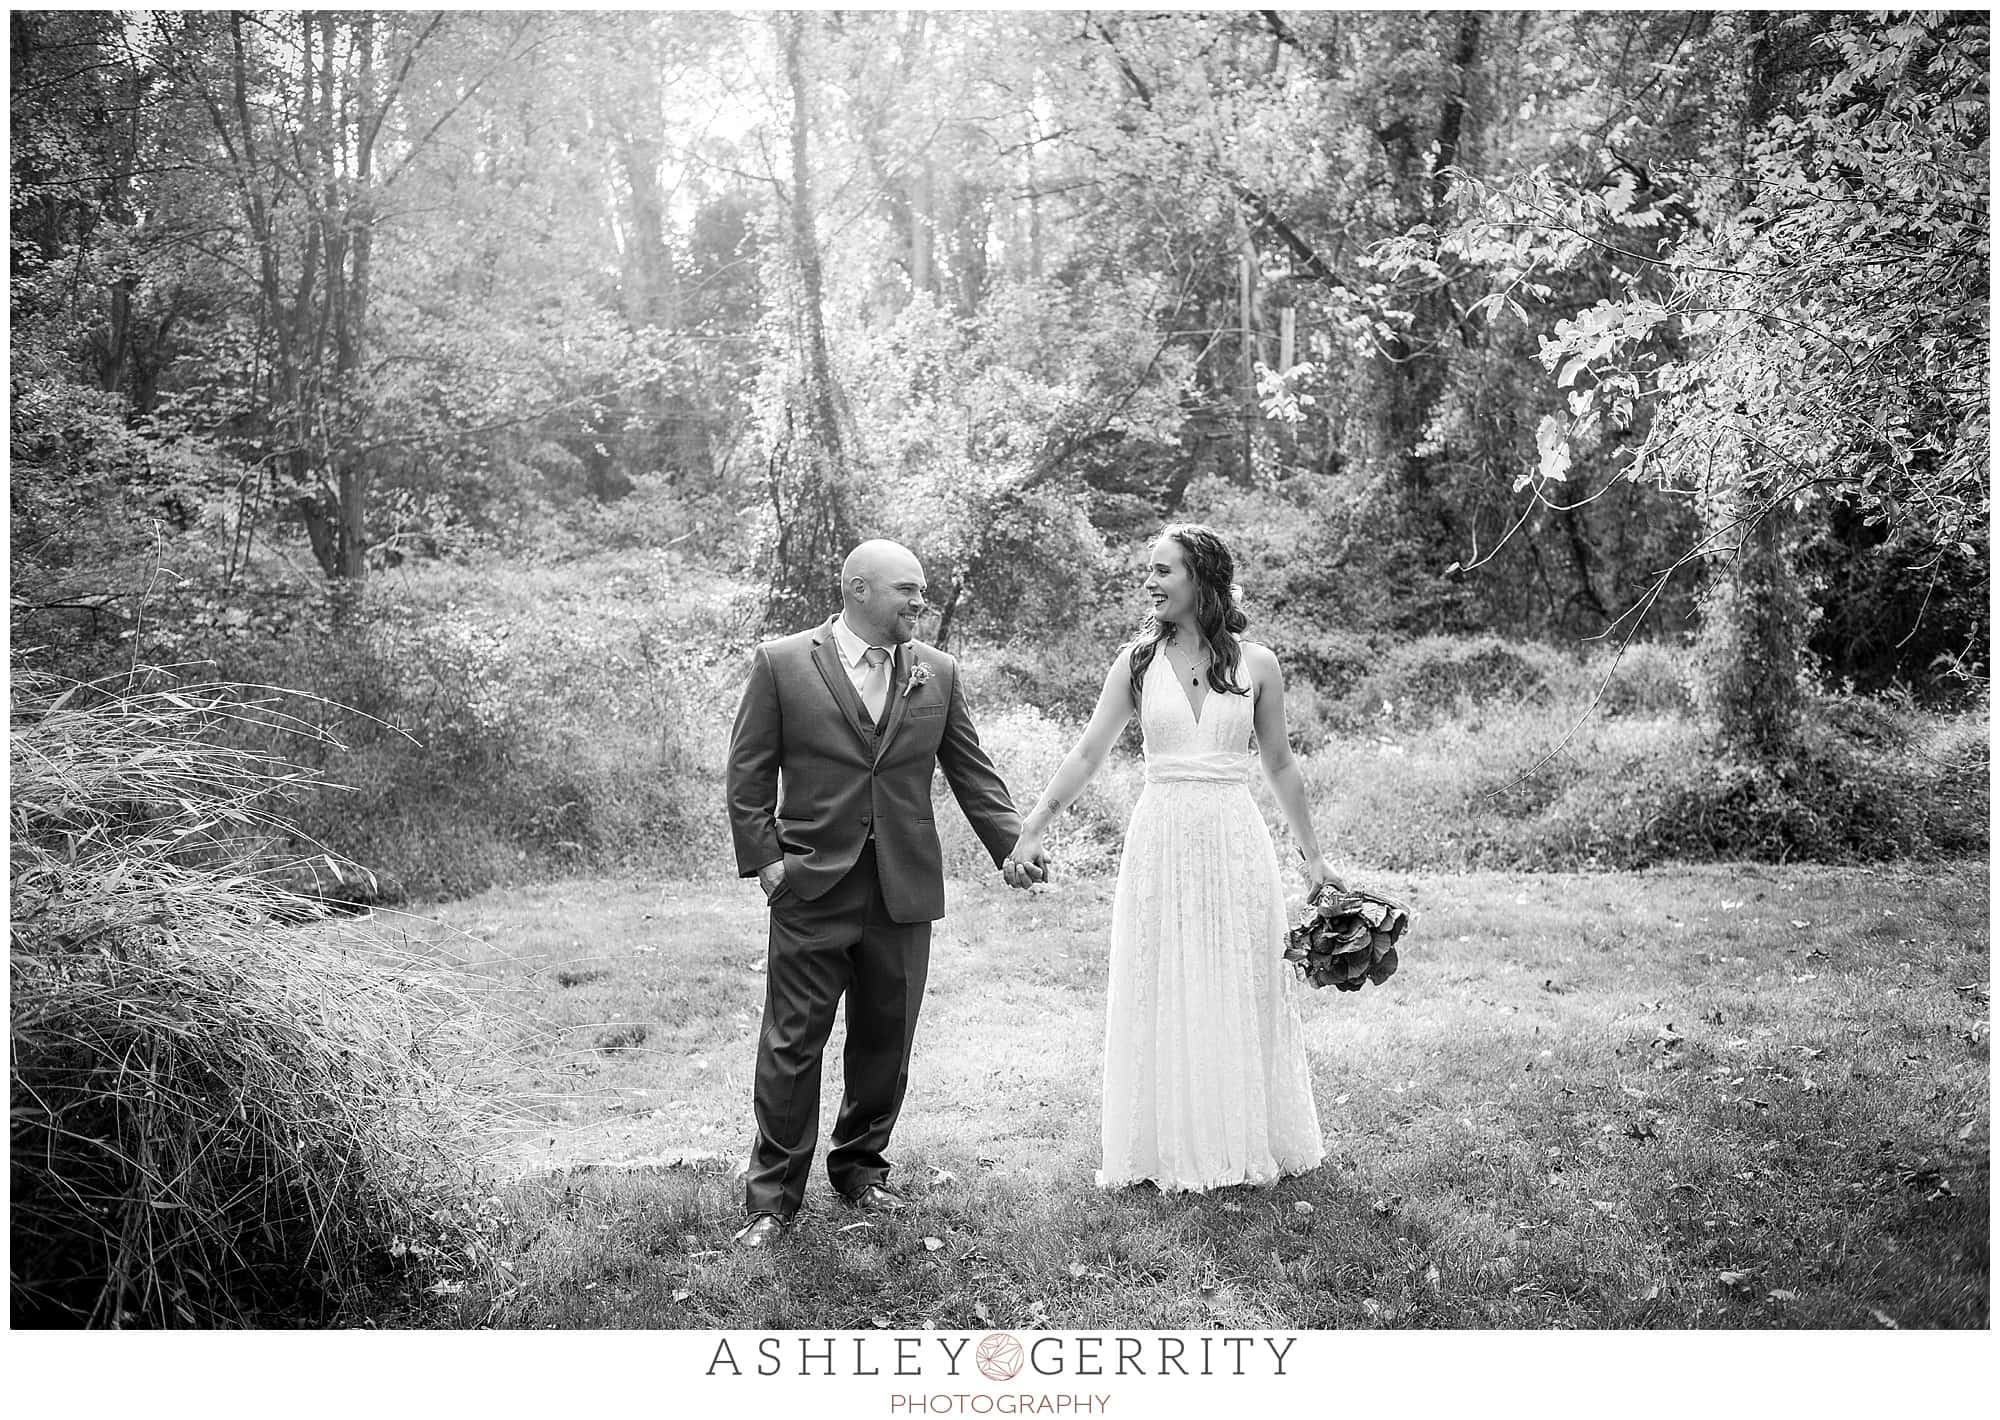 Bride & groom happily embracing in a field during their Chester Springs wedding in black & white